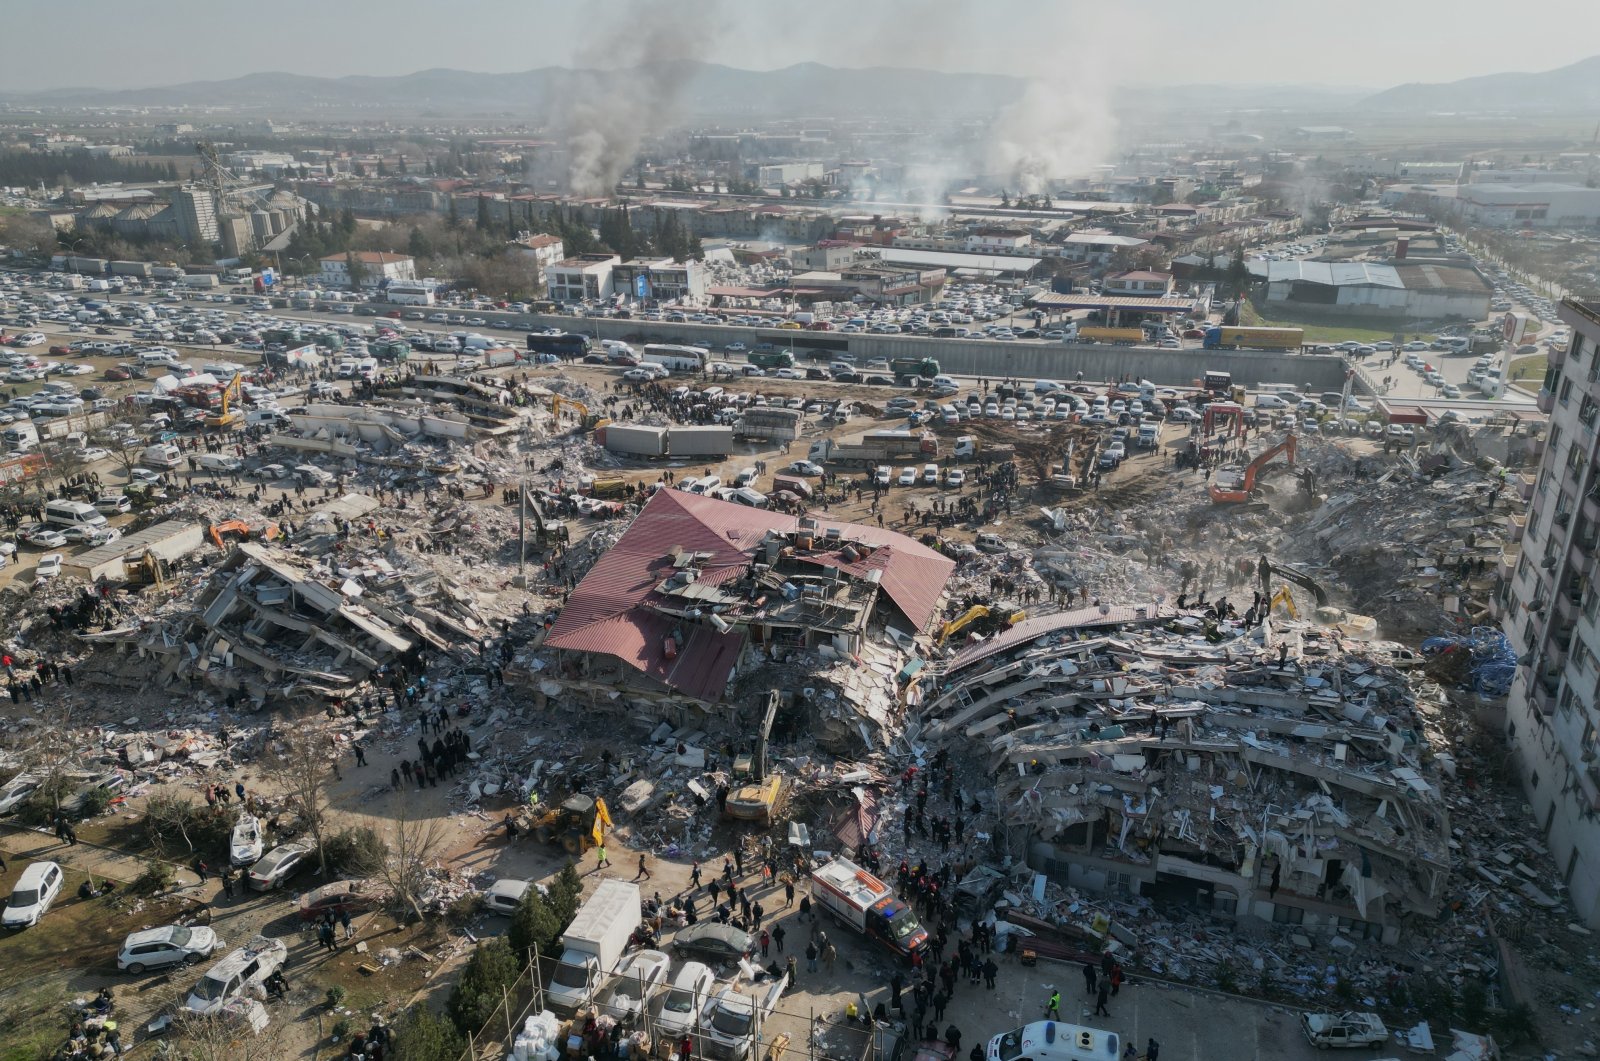  A photo taken with a drone shows emergency services working among the rubble of collapsed buildings in the aftermath of two powerful earthquakes in Kahramanmaraş, southeastern Türkiye, Feb. 9, 2023. (EPA Photo)